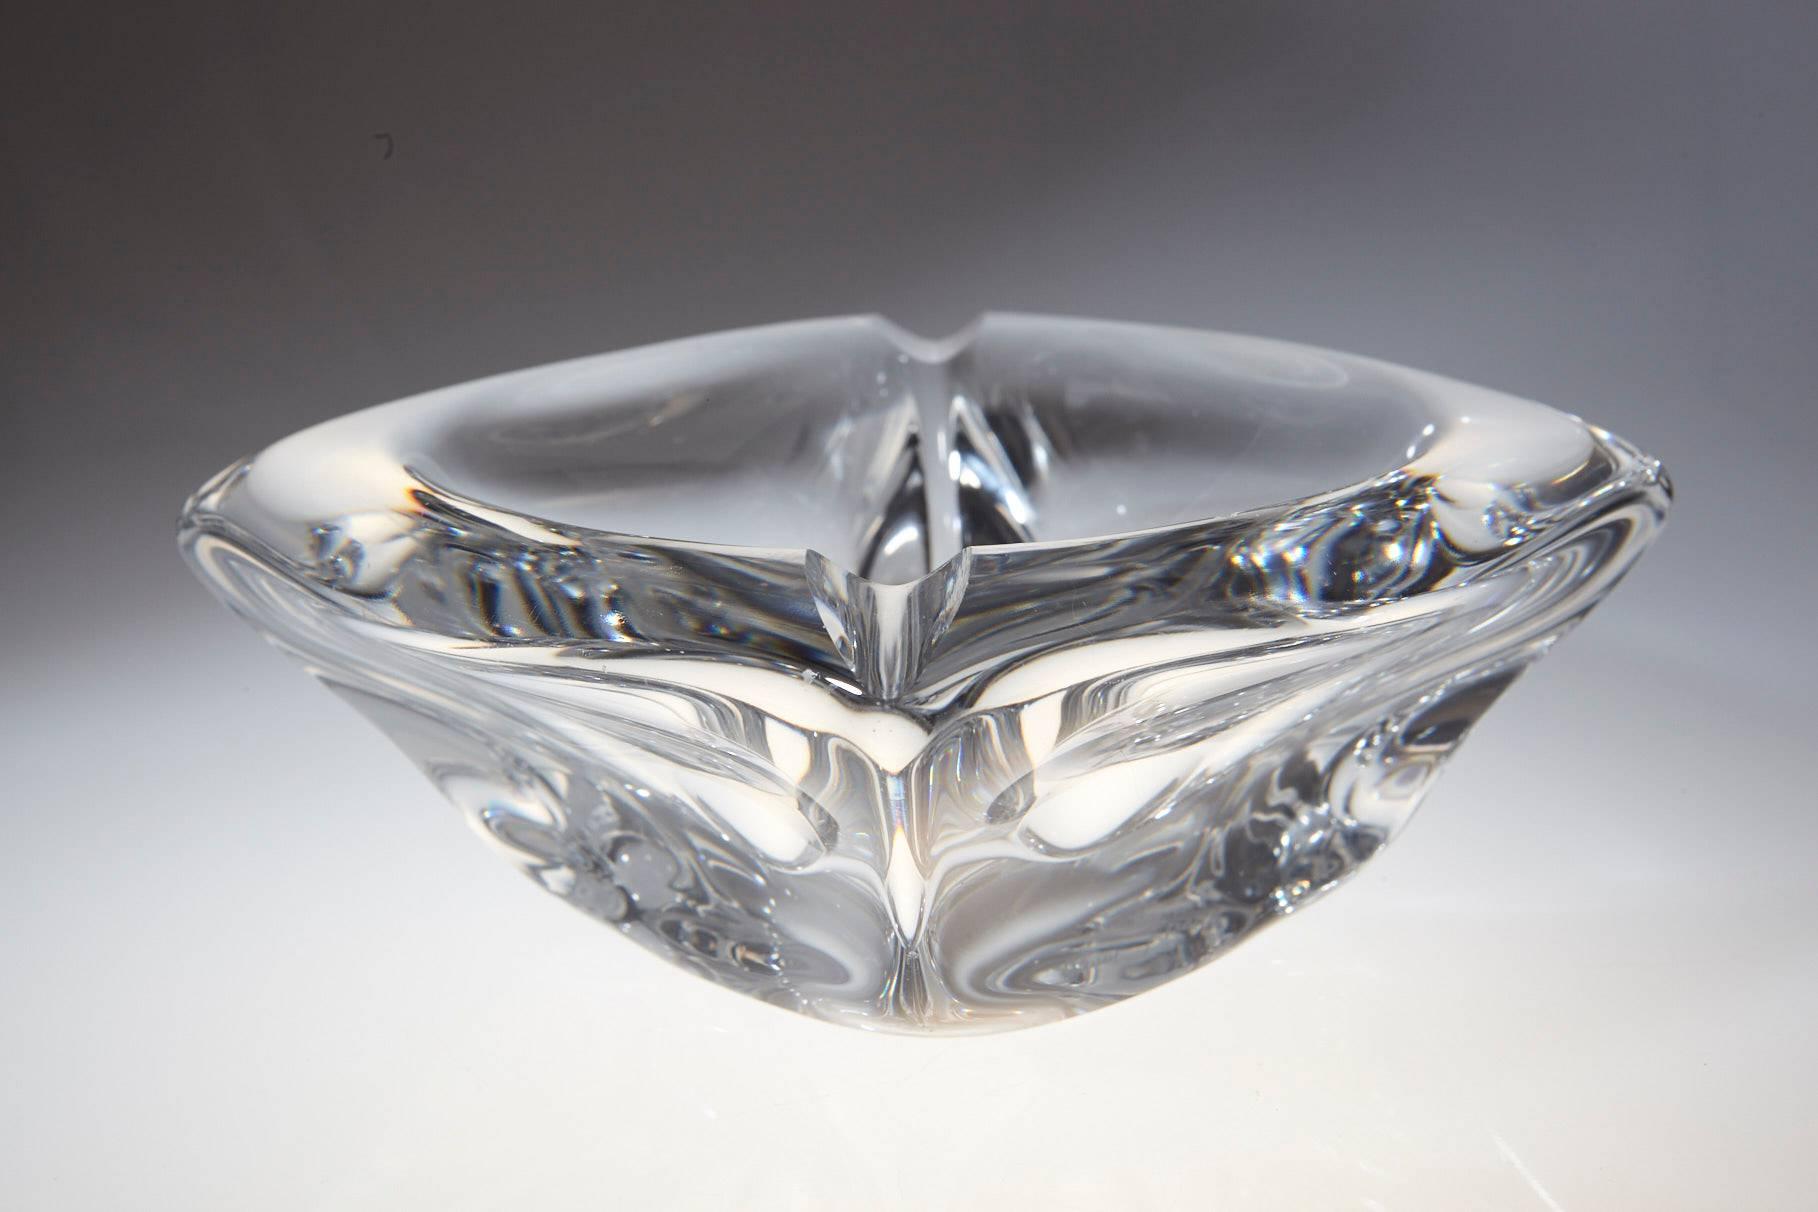 Impressive and heavy crystal ashtray signed by Daum France.
There is one tiny chip, please refer to the photo.